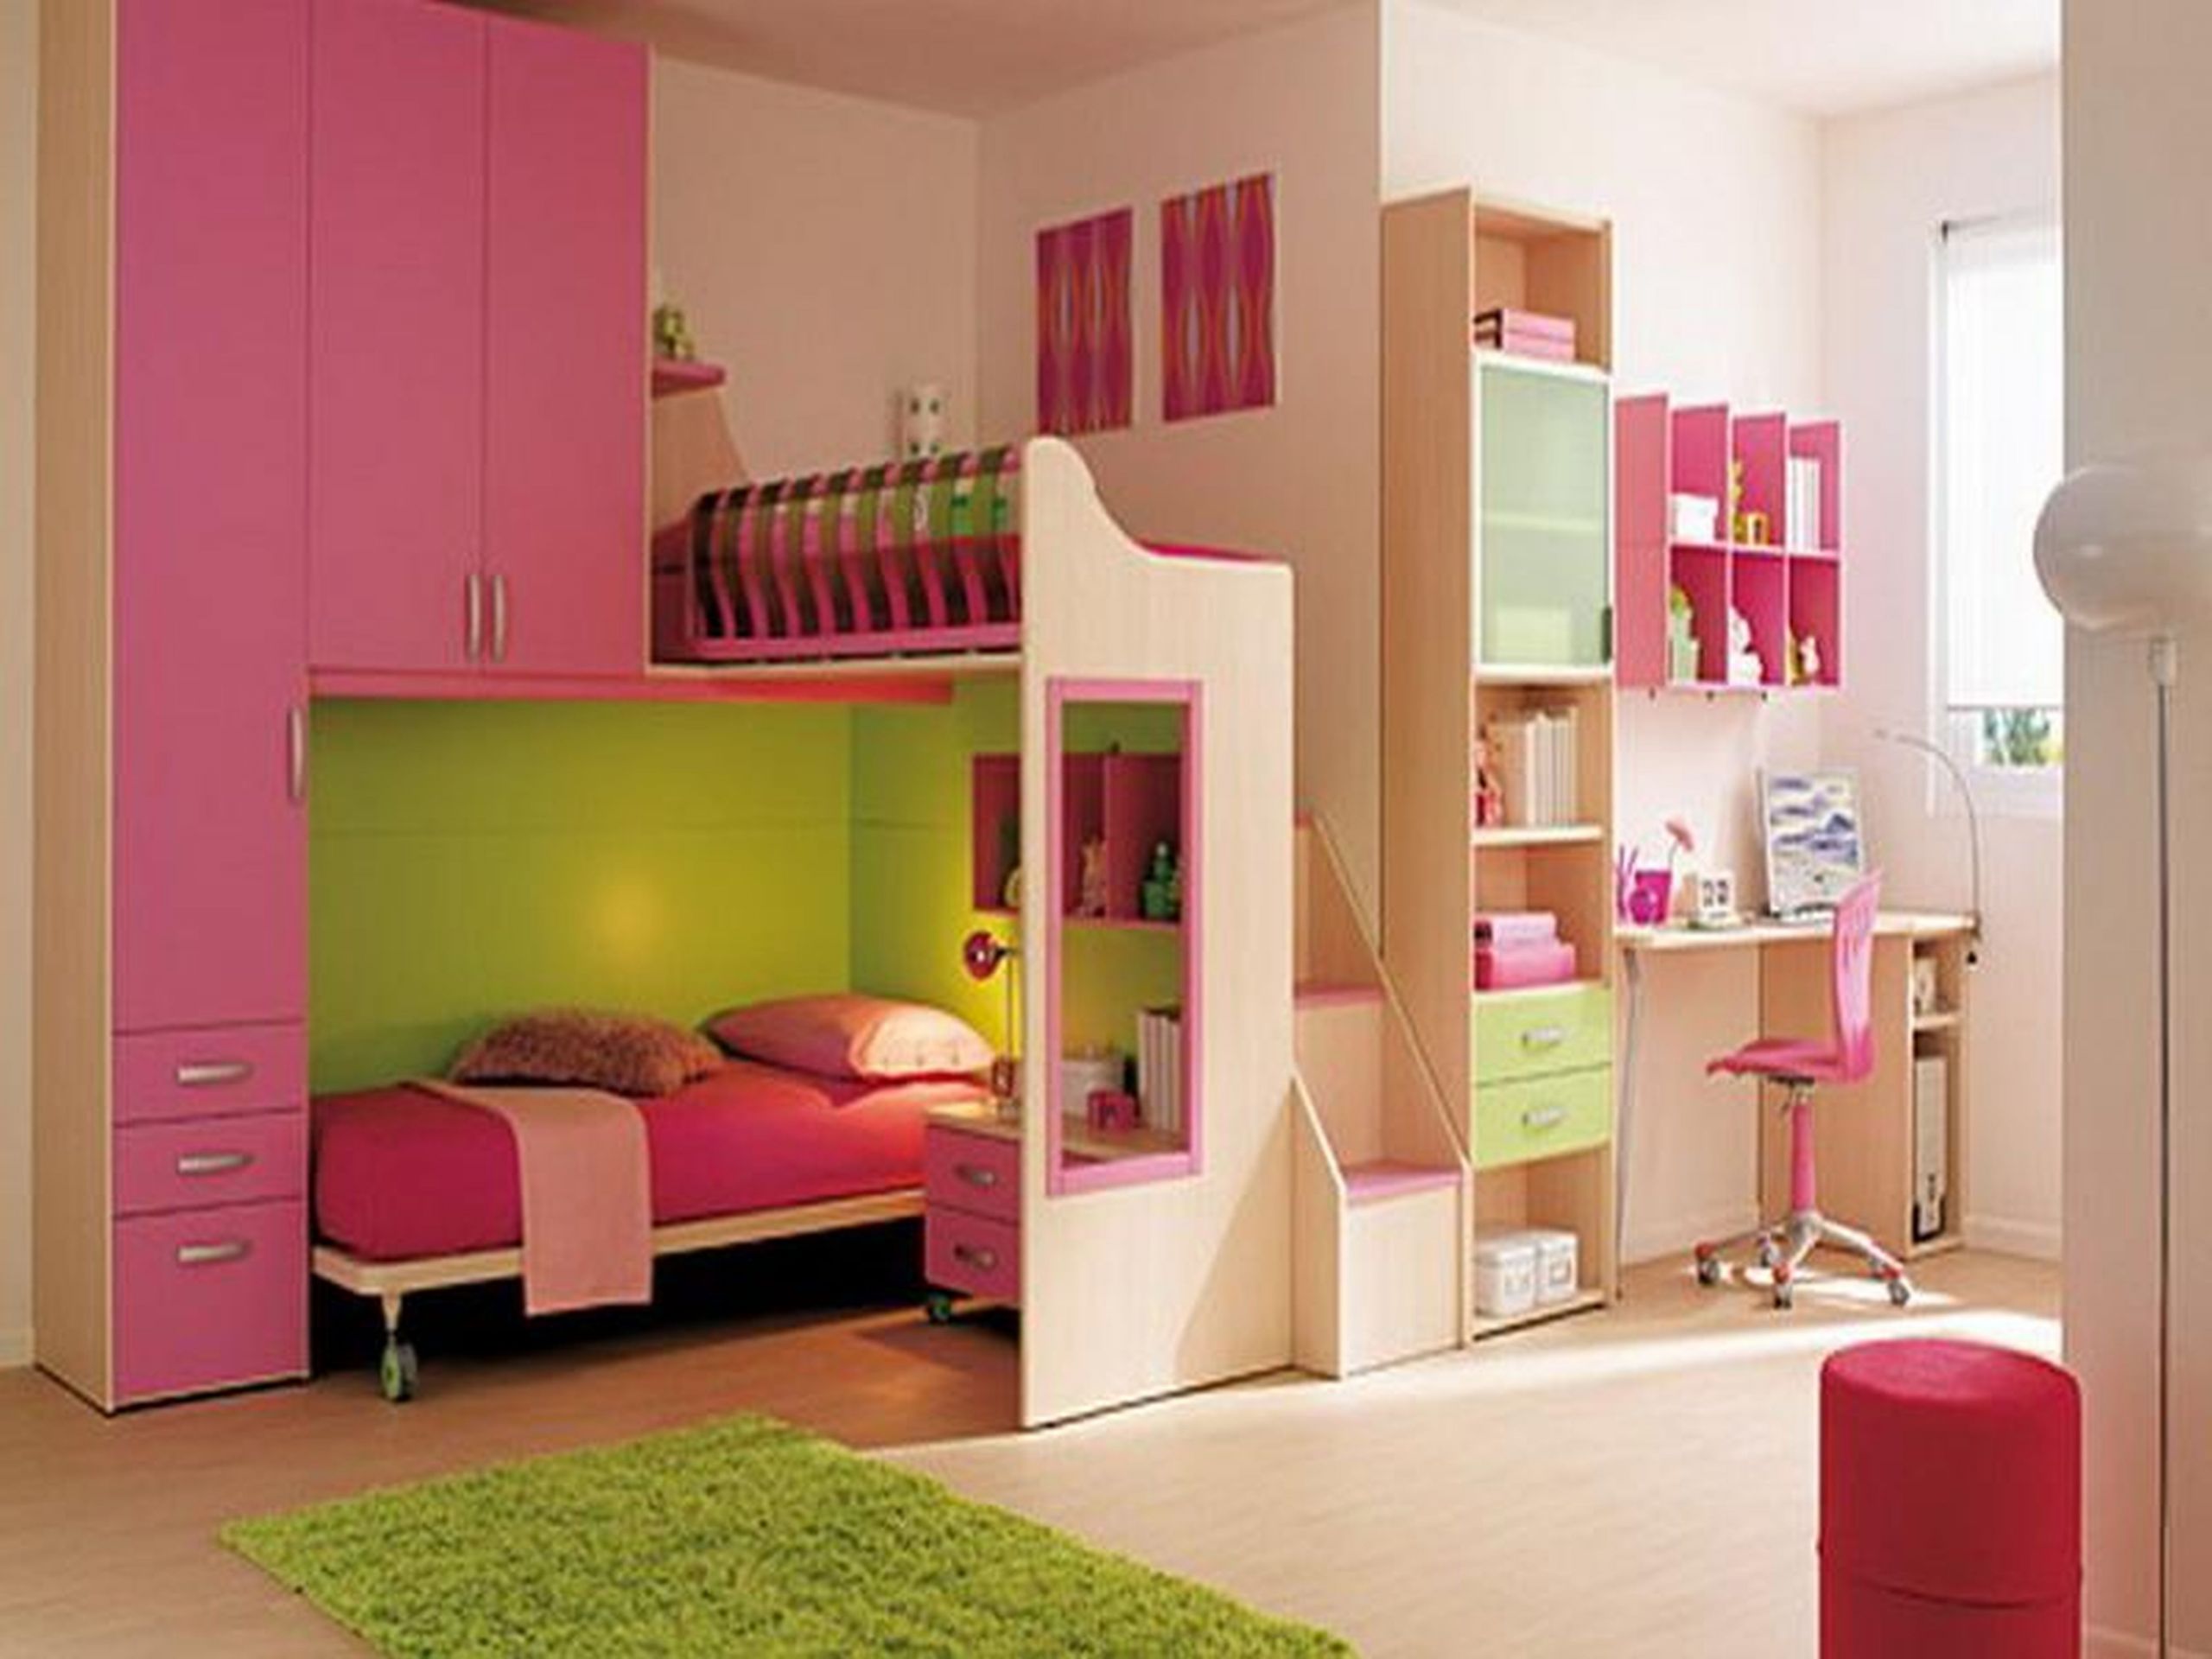 DIY Kids Bedroom Ideas
 DIY Storage Ideas For Kids Room Crafts To Do With Kids